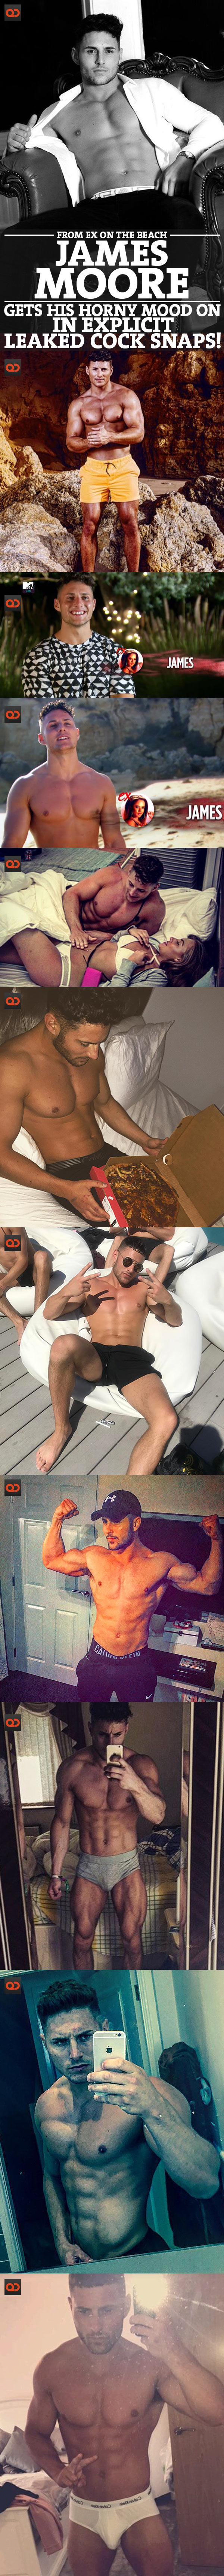 James Moore, From Ex On The Beach, Gets His Horny Mood On In Explicit Leaked Cock Snaps!